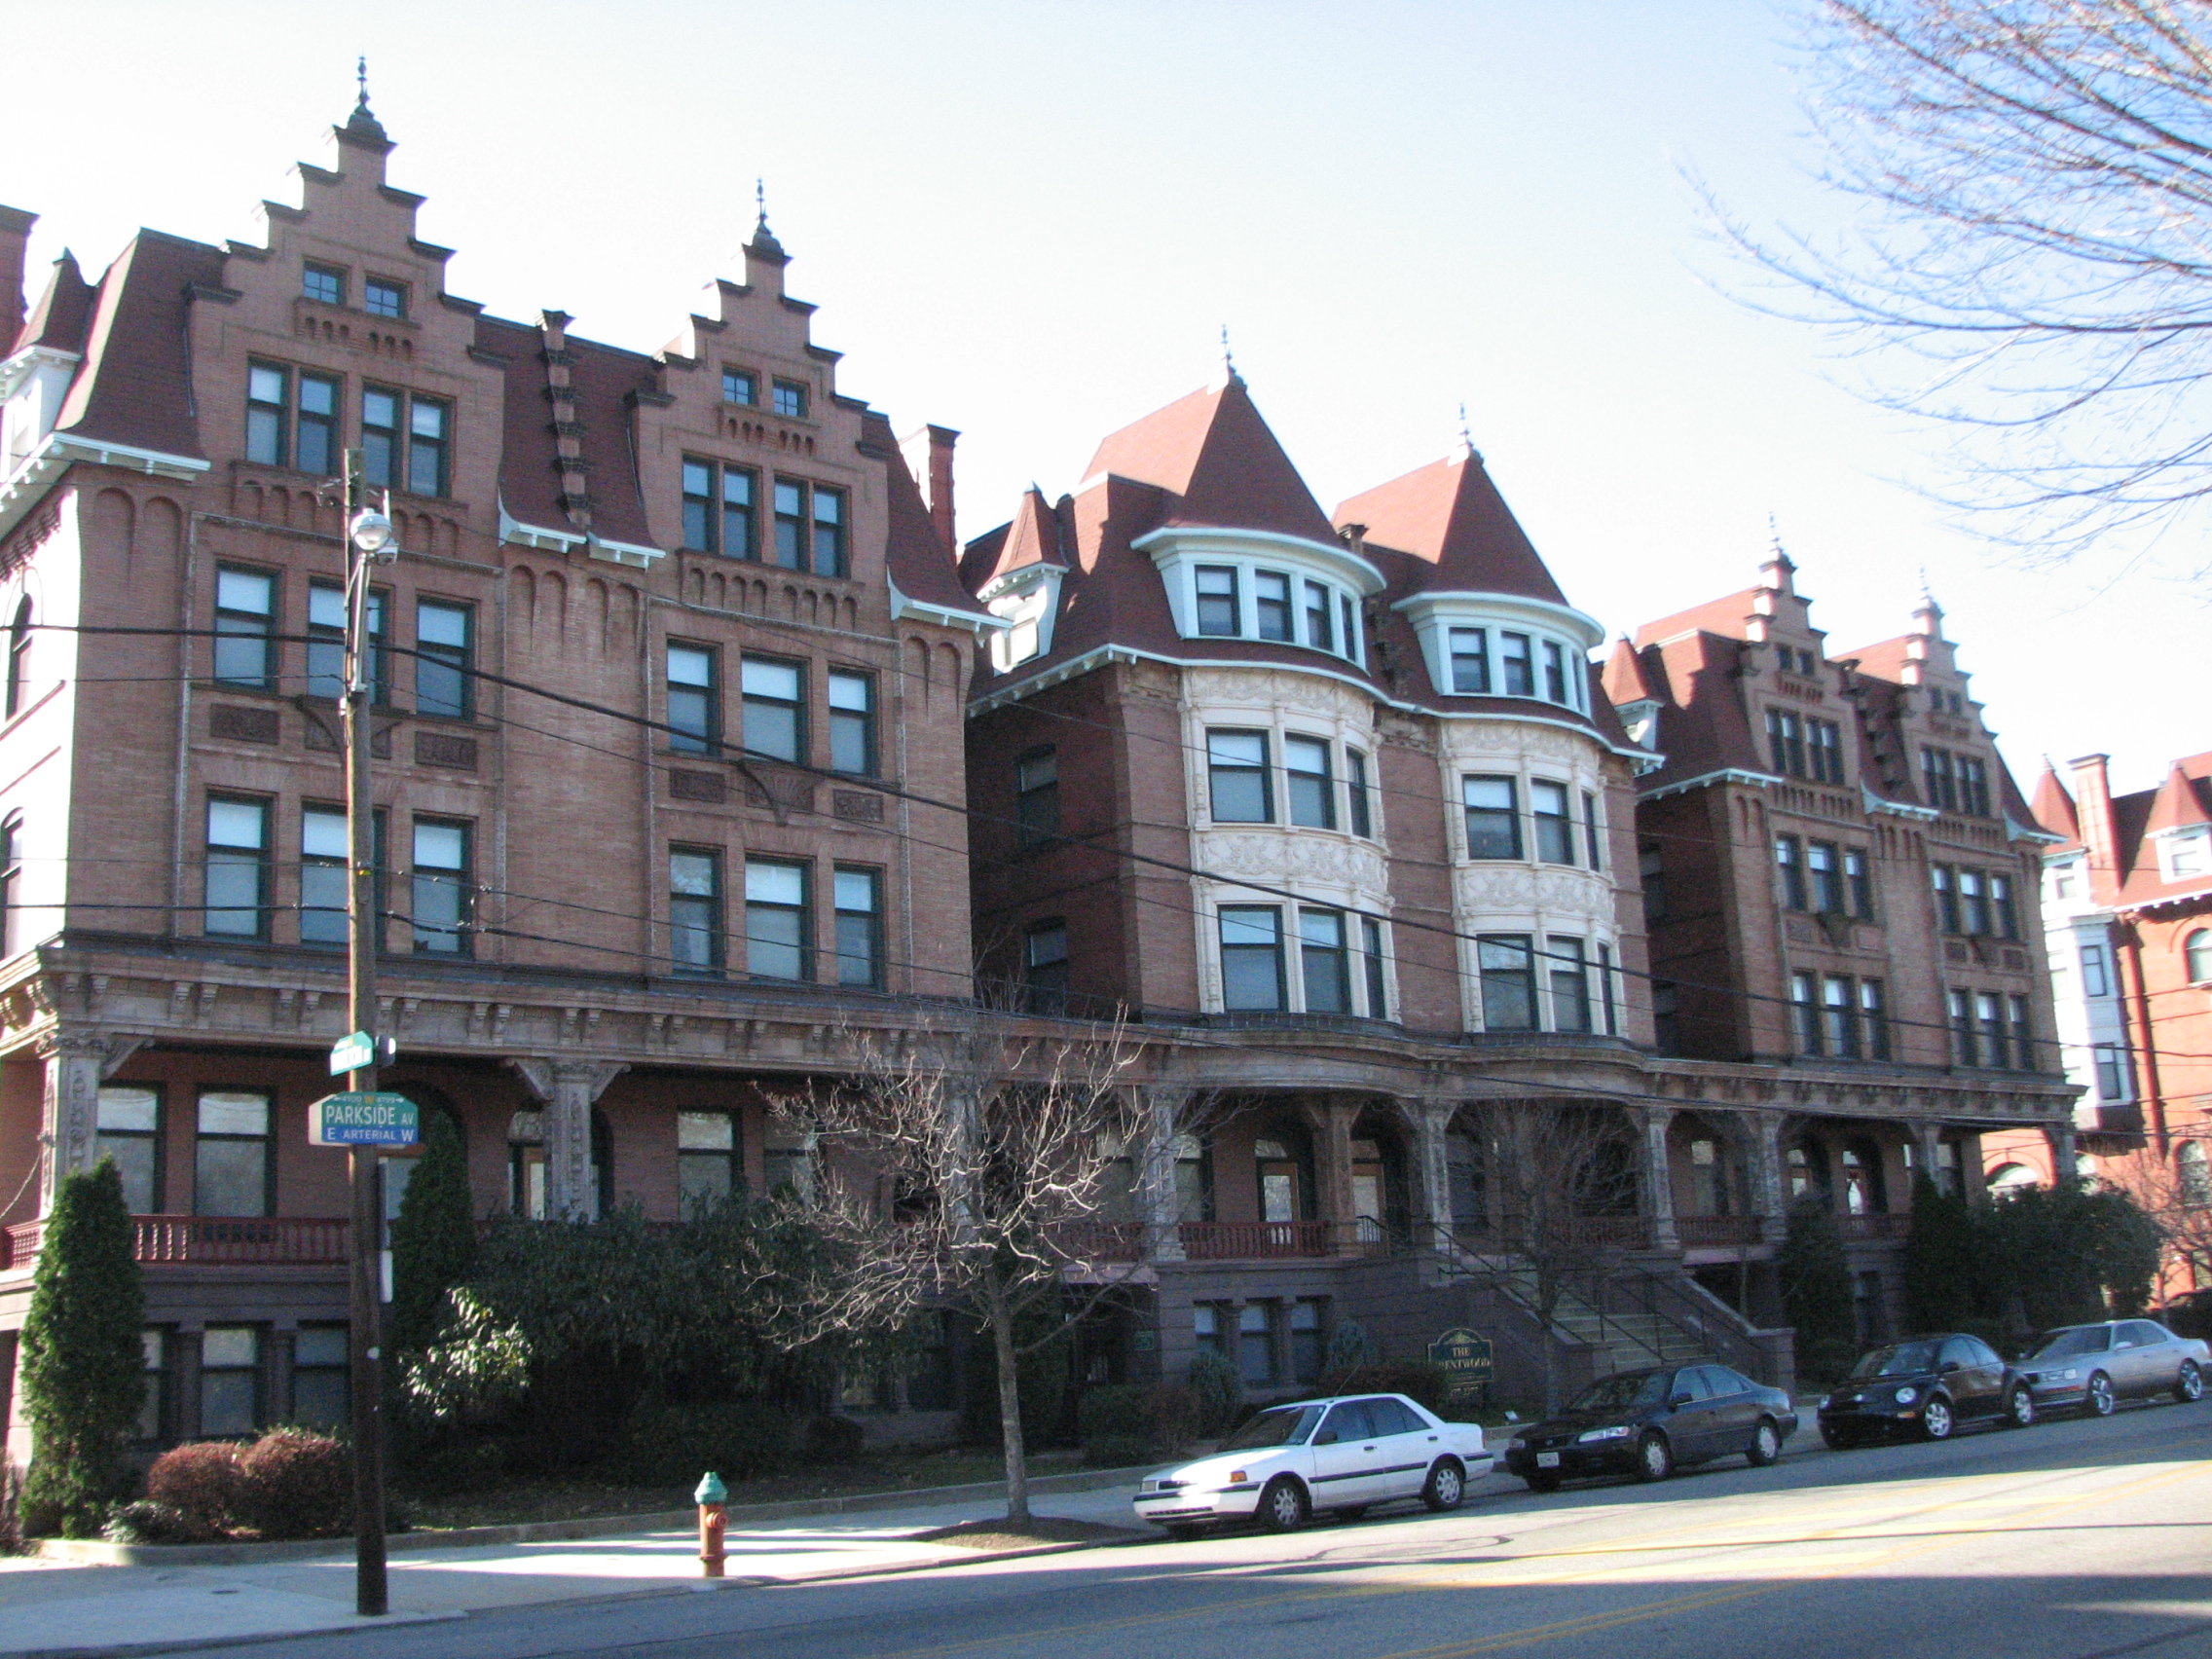 The 110 regal homes of Parkside make up the most recently designated historic district.